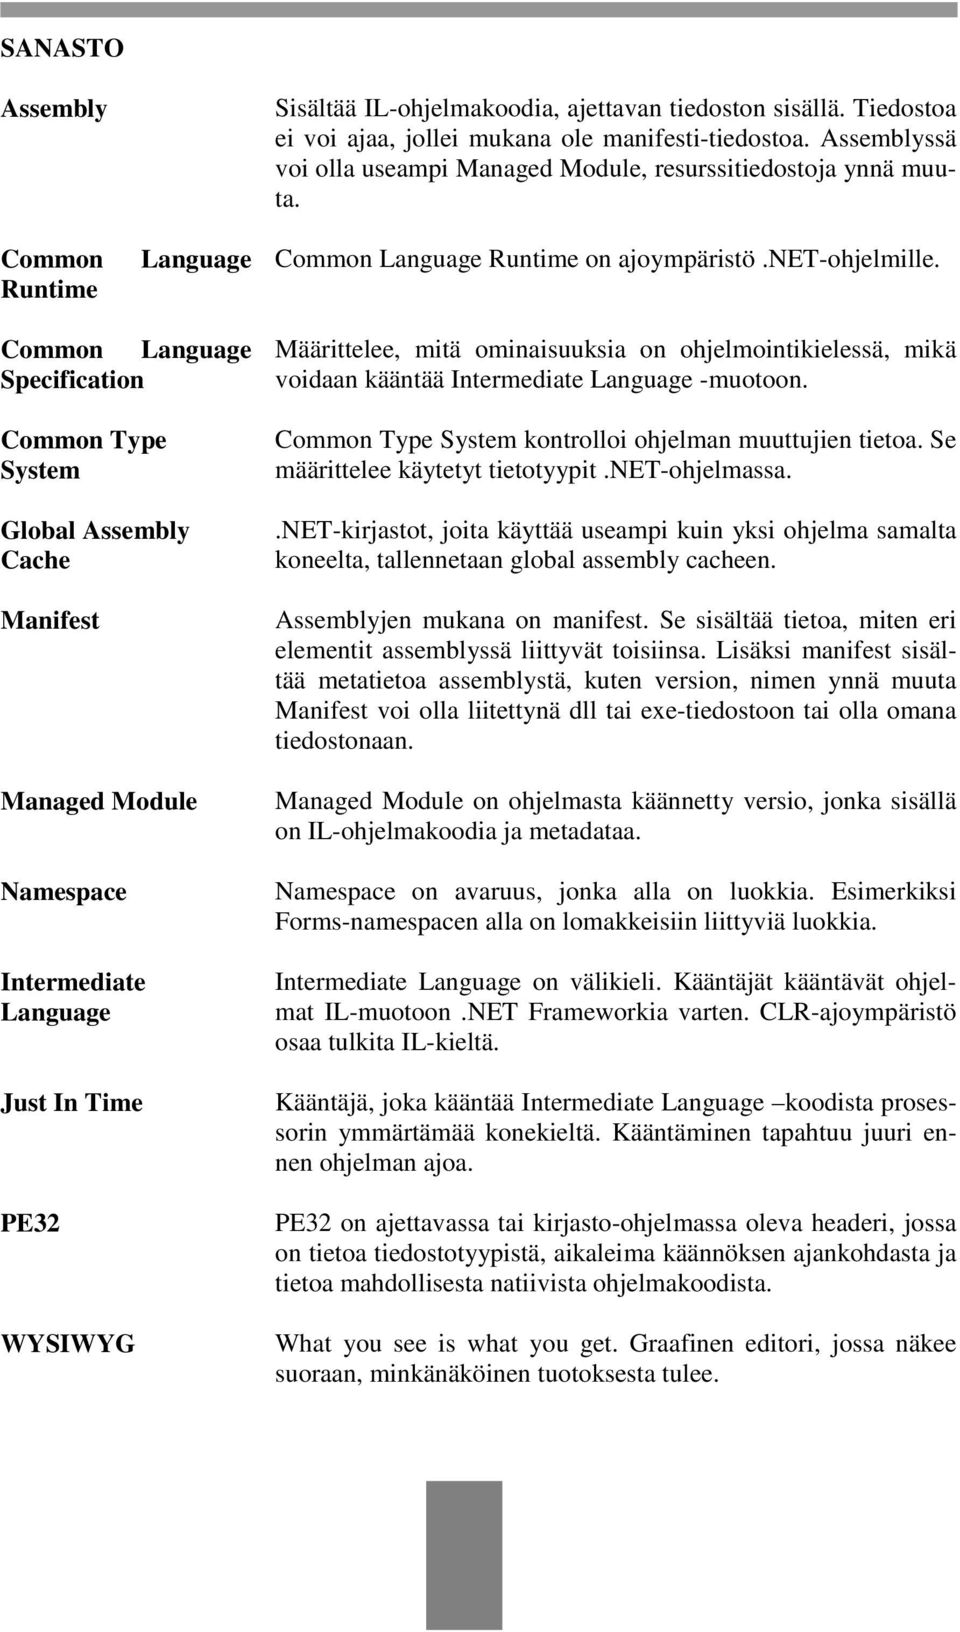 Common Language Specification Common Type System Global Assembly Cache Manifest Managed Module Namespace Intermediate Language Just In Time PE32 WYSIWYG Määrittelee, mitä ominaisuuksia on